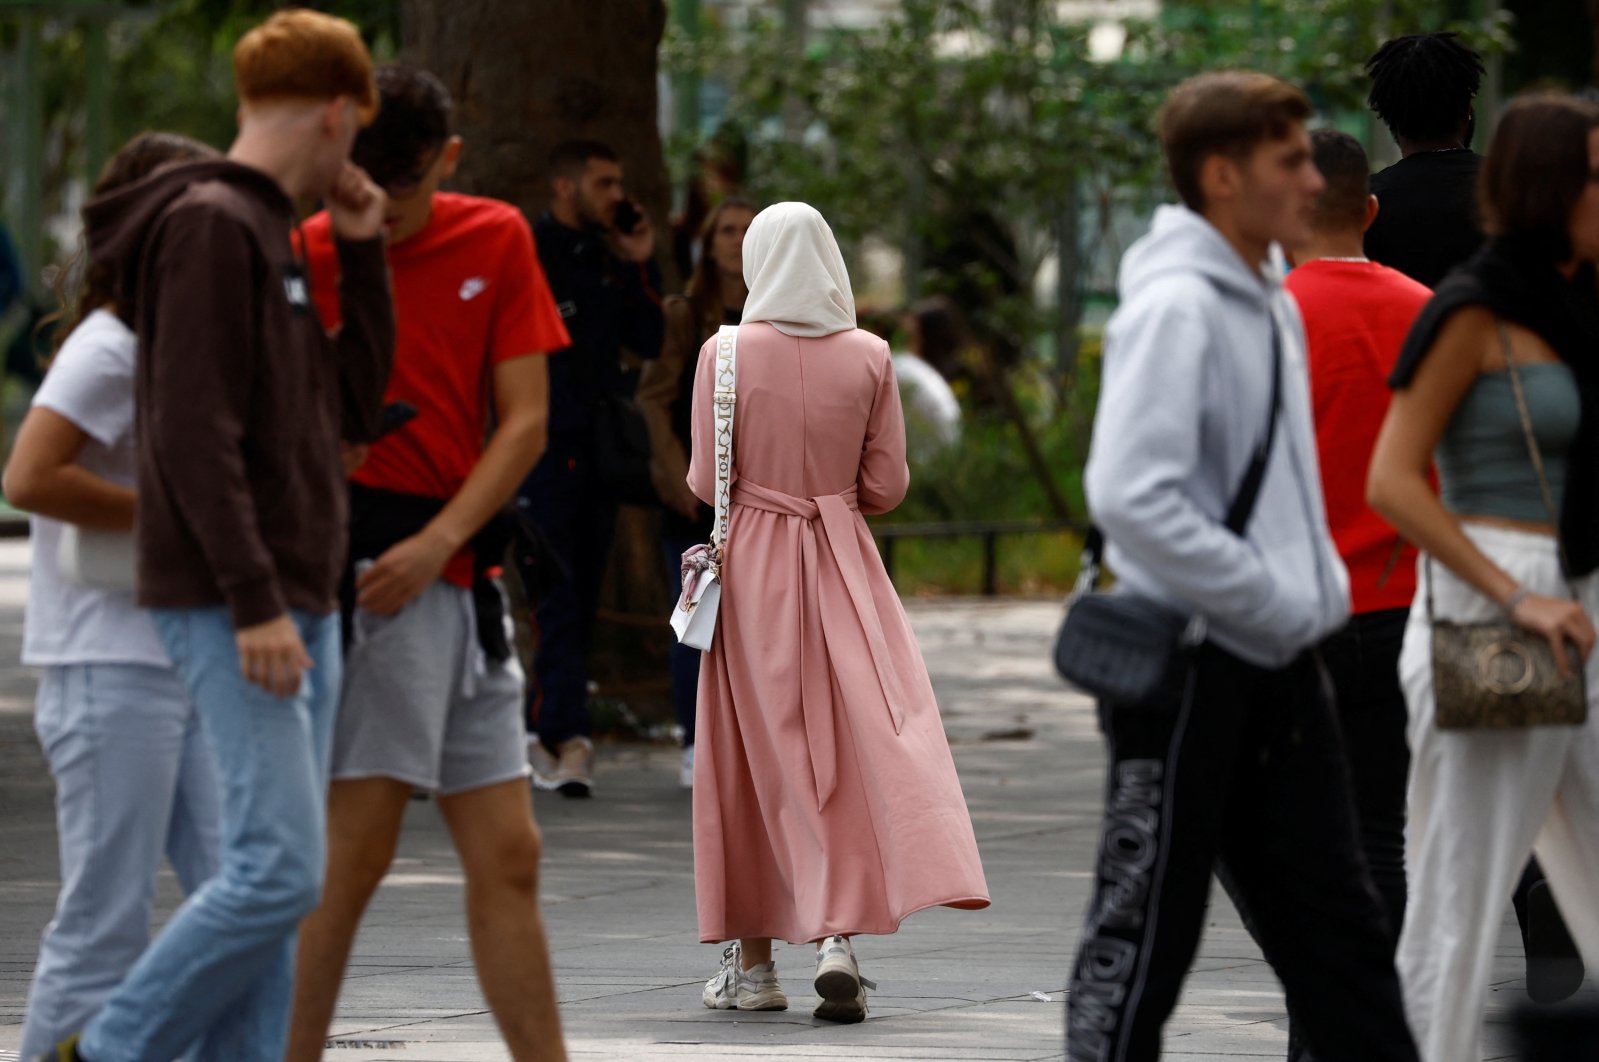 Over 500 schools in France’s crosshairs after contentious abaya ban